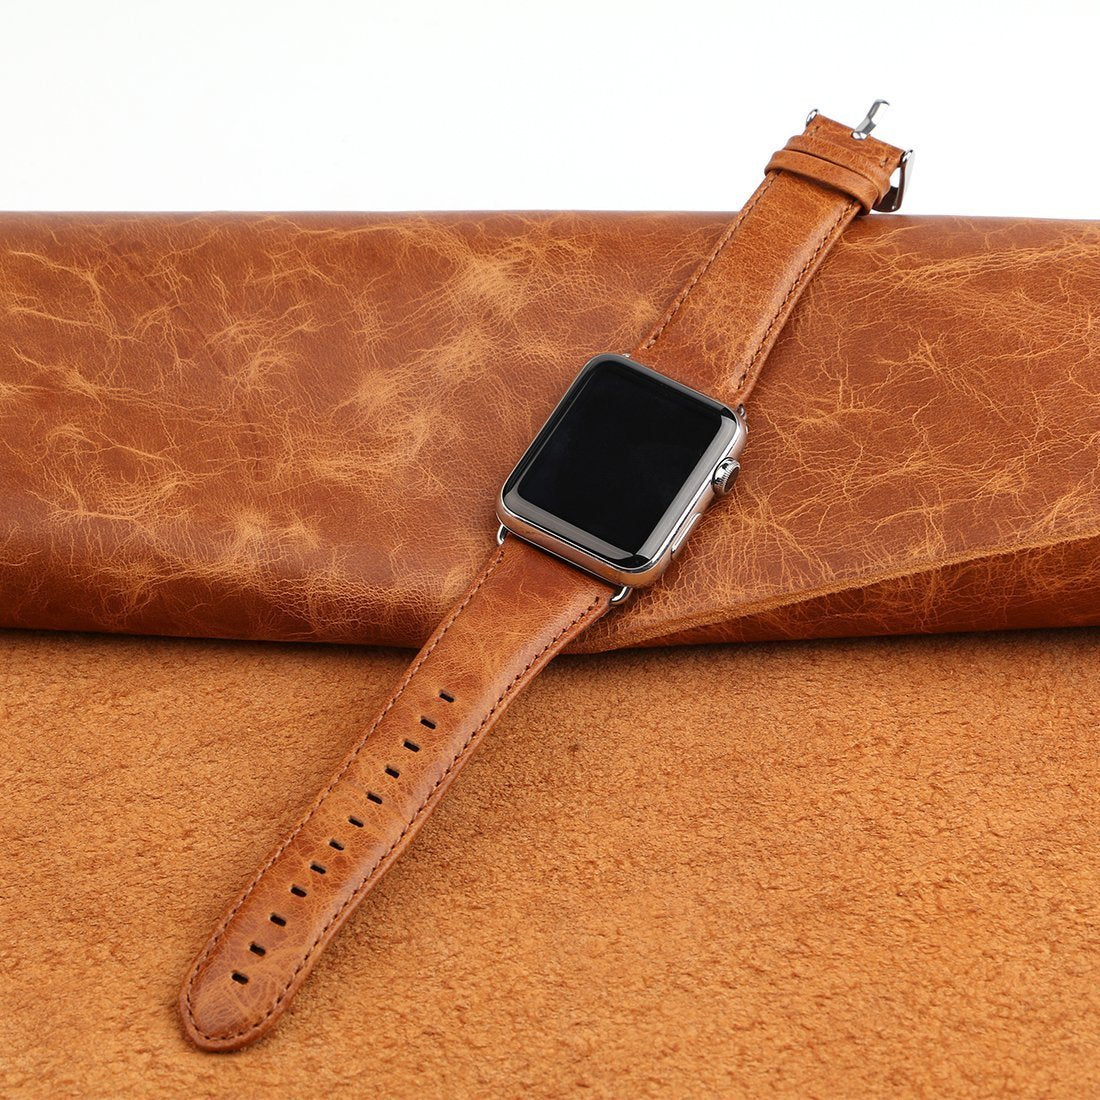 Genuine Leather Wrist Band 42mm for Apple Watch  (ONLY STRAP NOT WATCH)